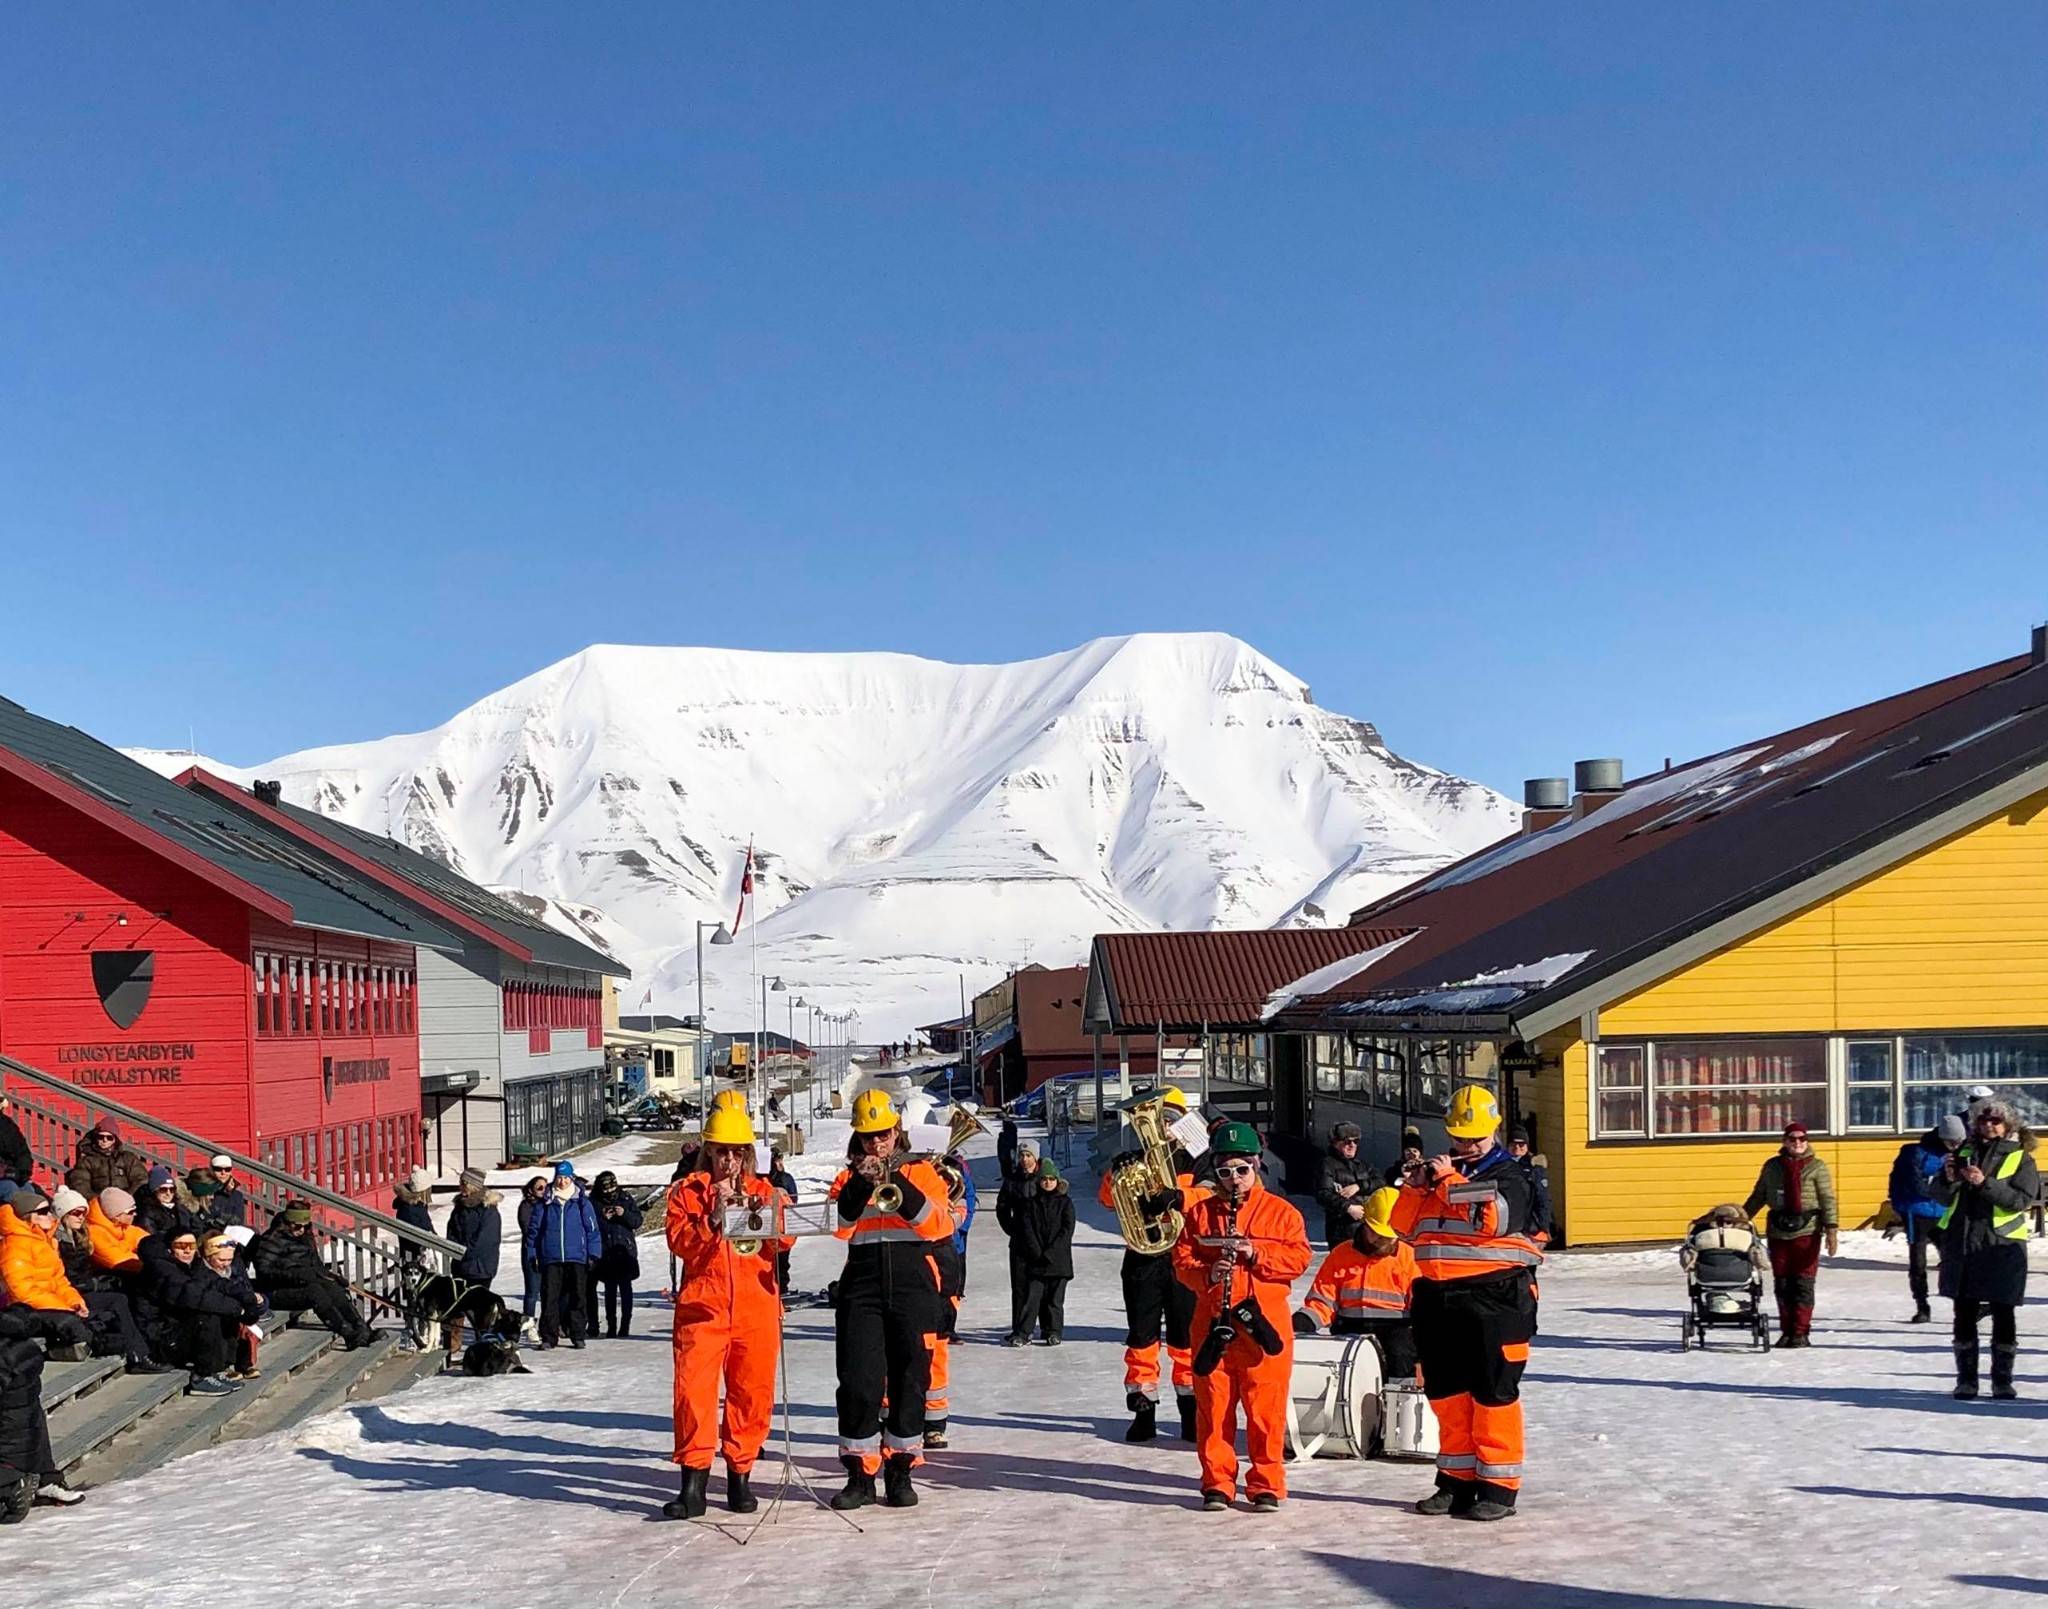 Courtesy photo / Mark Sabbatini
Icepeople editor and former Juneau Empire reporter Mark Sabbatini covered news in Longyearbyen, Svalbard, Norway, seen here, for years, before returning to Juneau in July 2021.